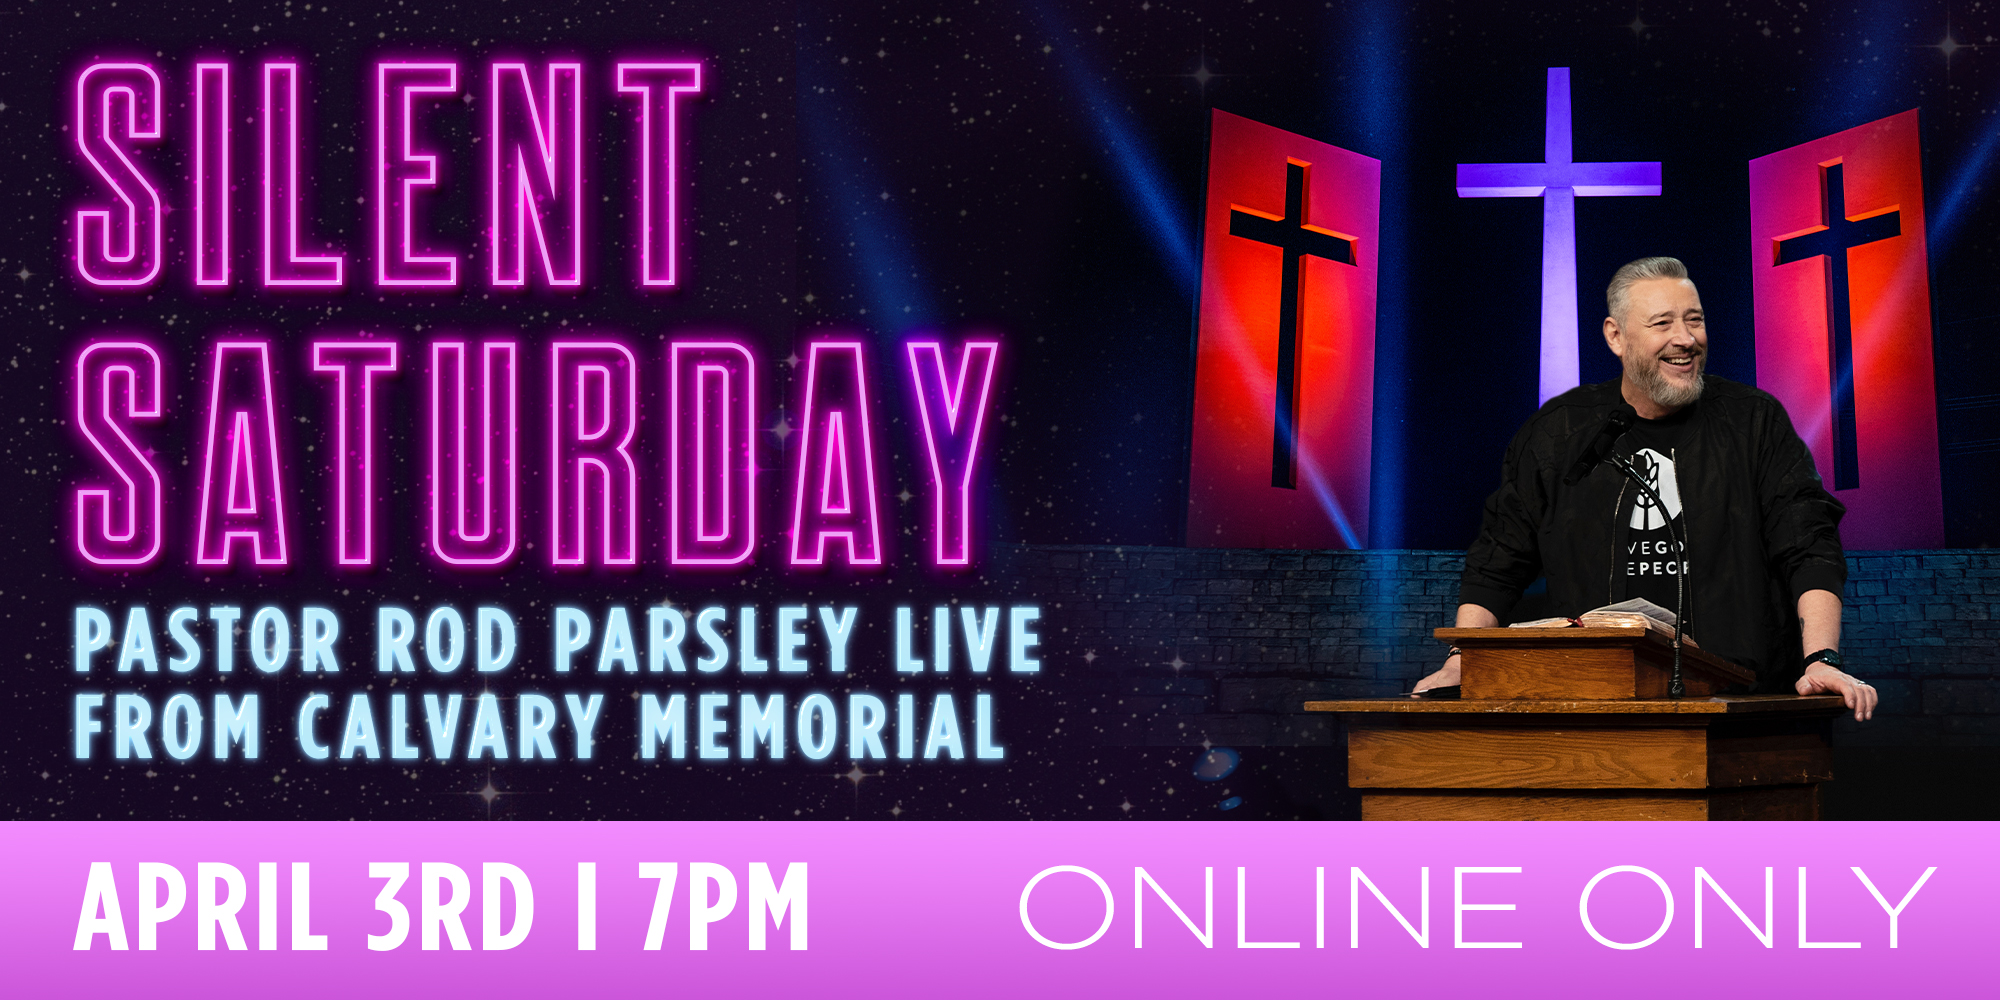 Silent Saturday Pastor Rod Parsley Live from Calvary Memorial April 3rd 7PM Online Only